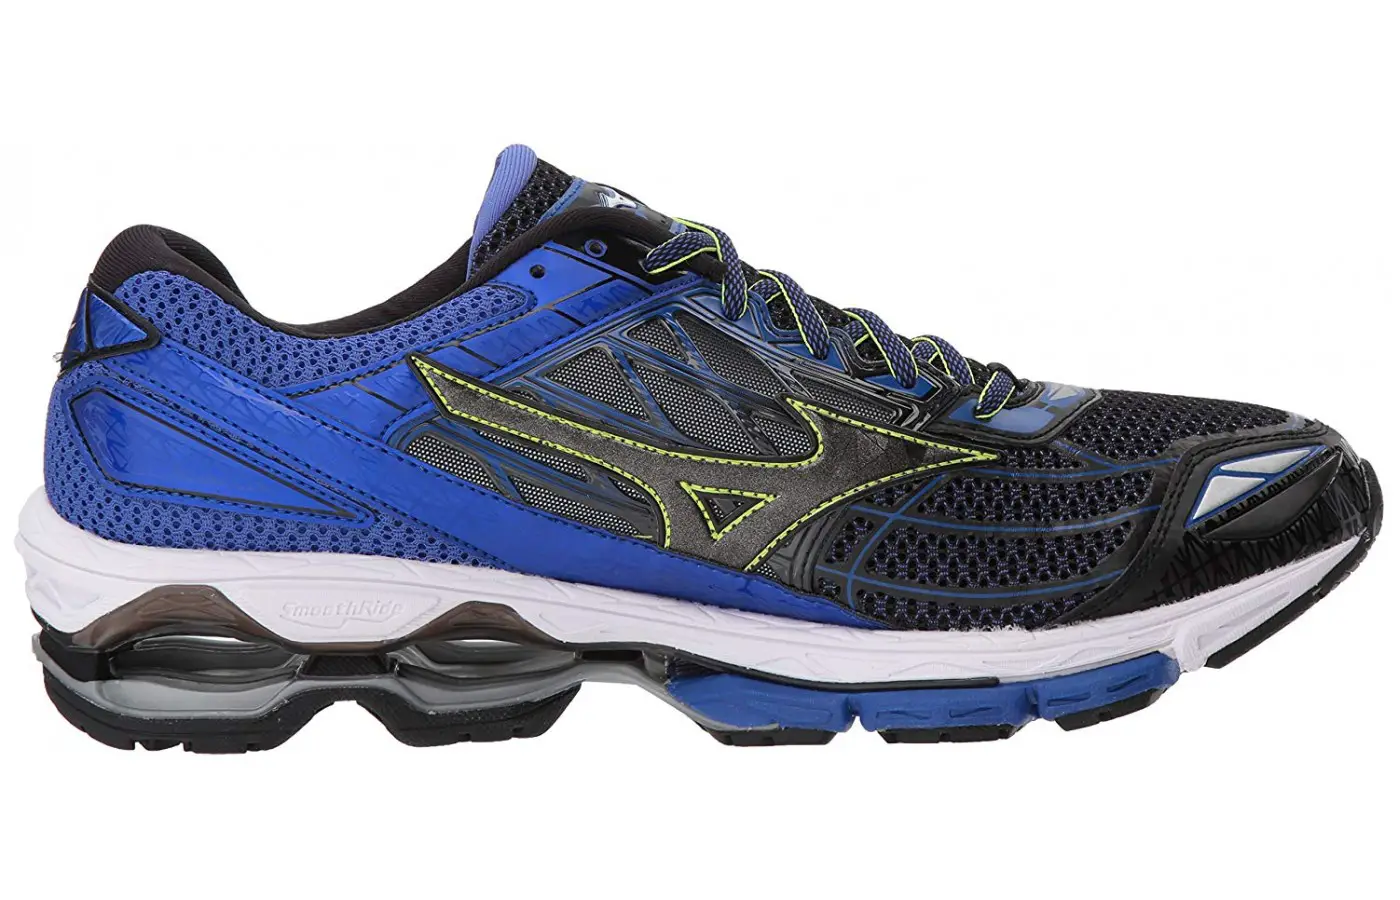 Every running shoe has a quieter color combination and a brighter one 